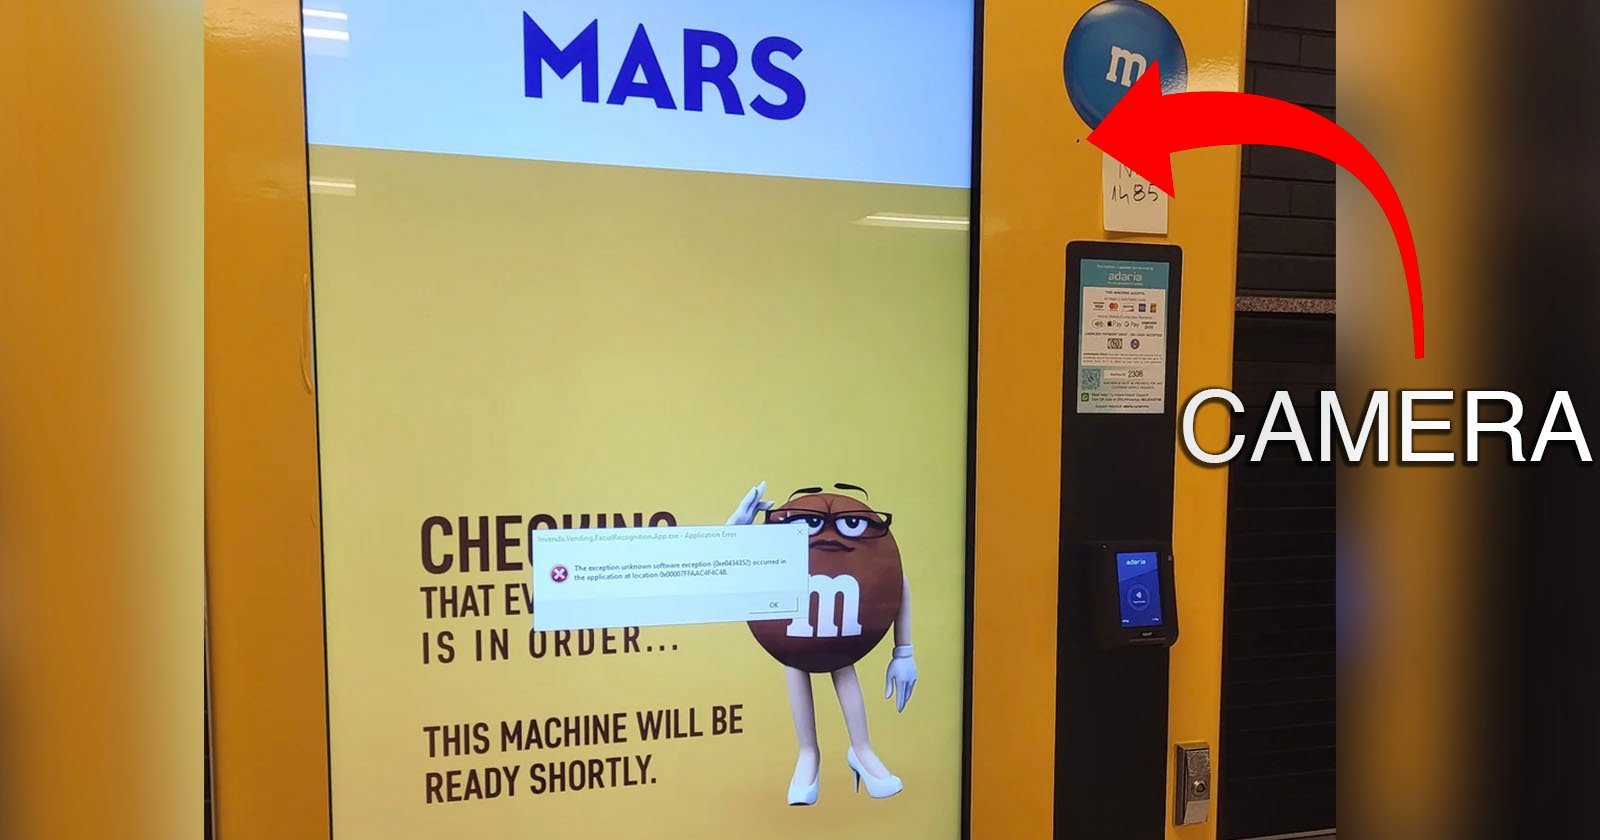  students discover vending machine spying them 